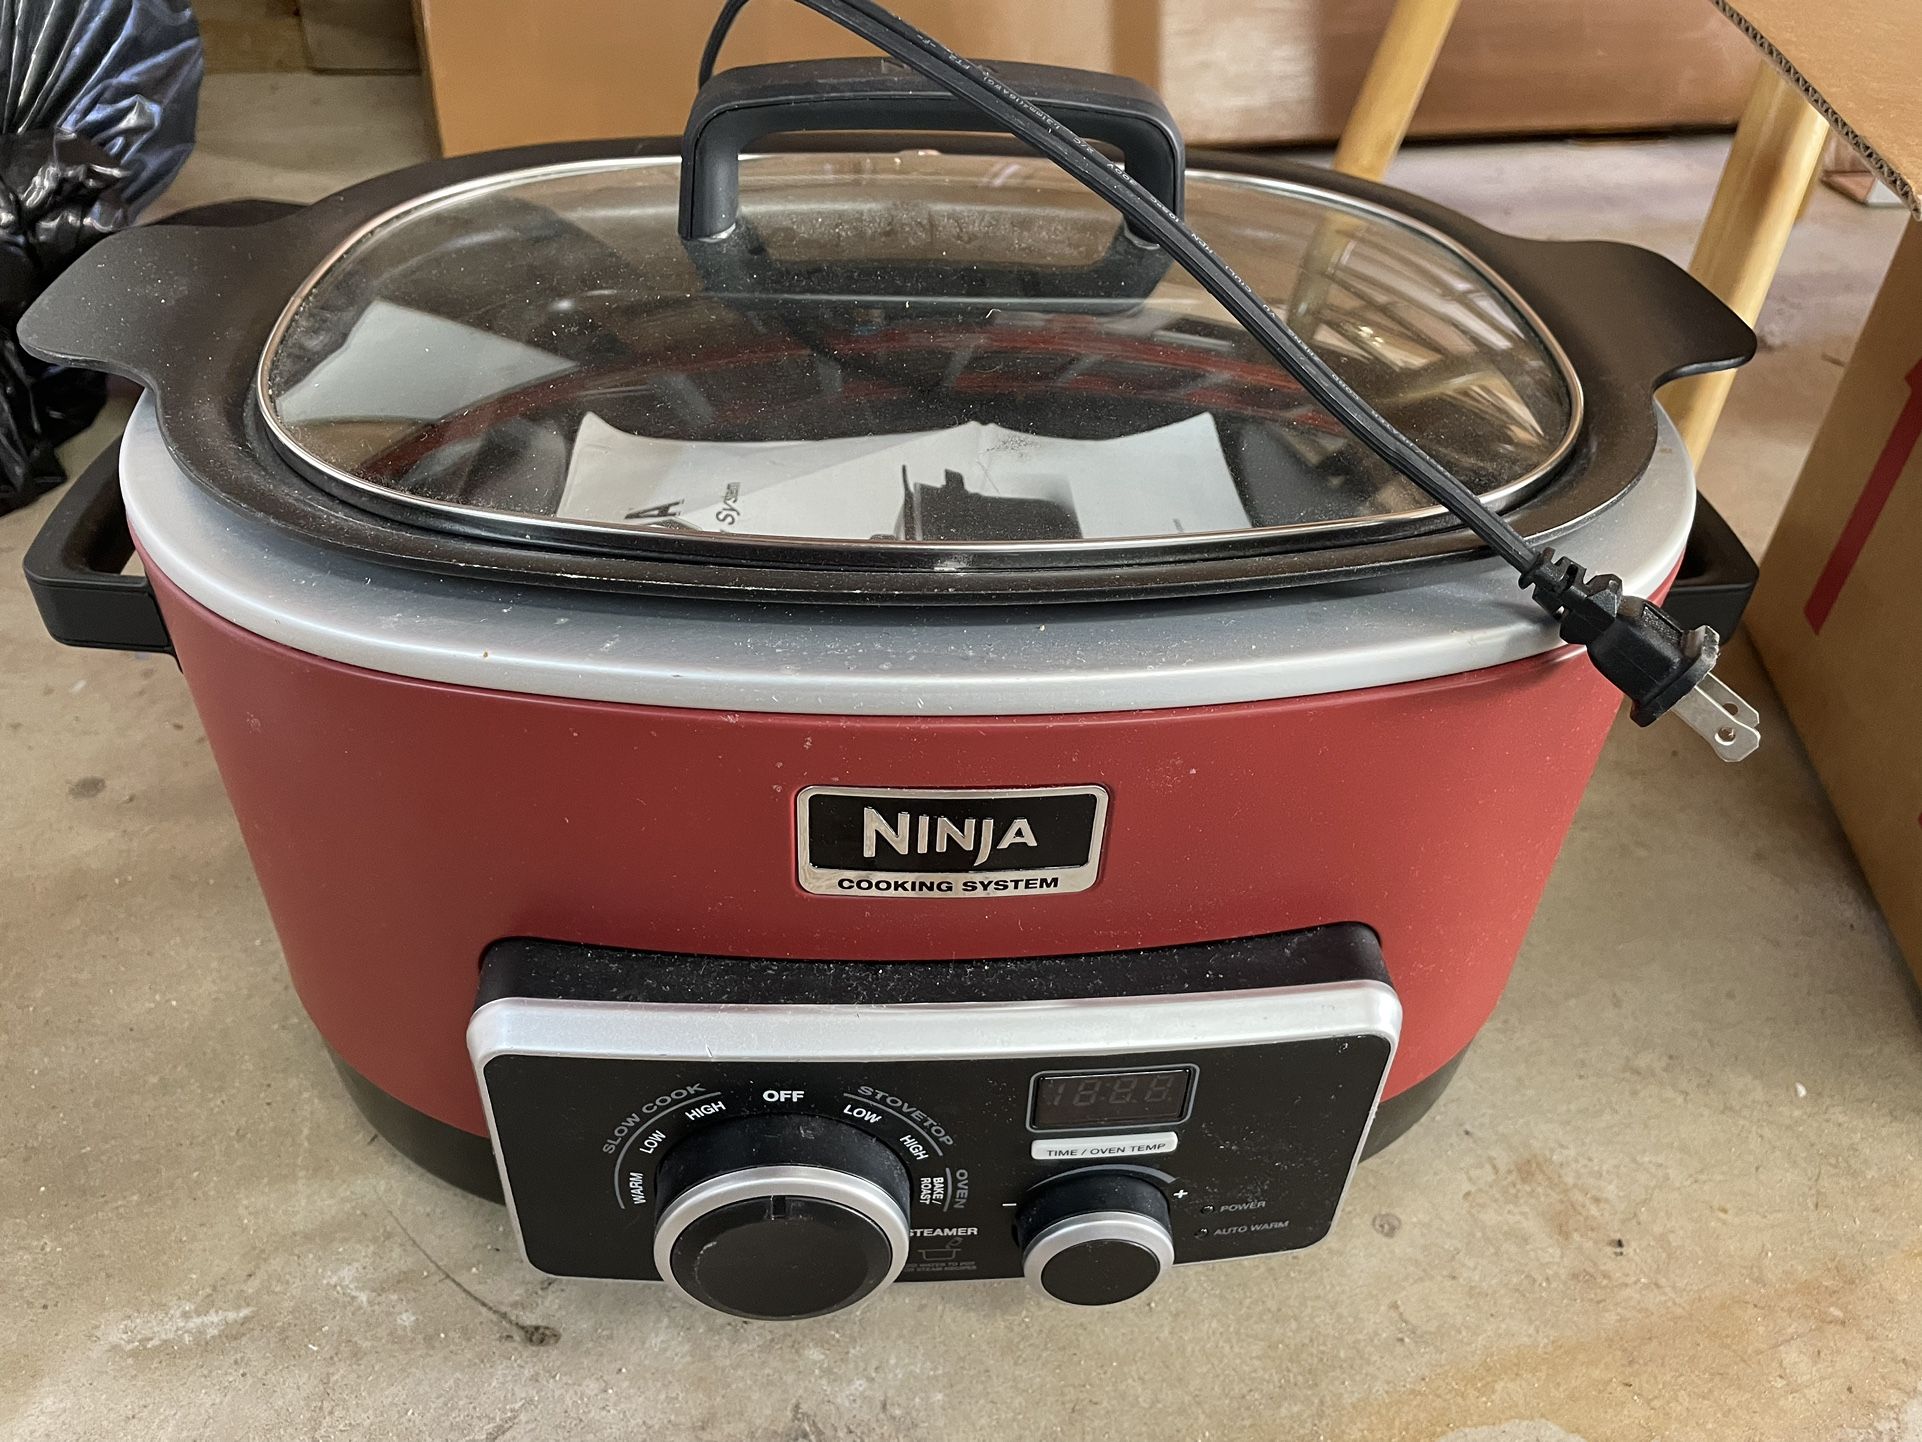 Ninja Multi-Cooker Plus (4 in 1) System - Slow Cooker, Stove Top, Oven and Steamer like new